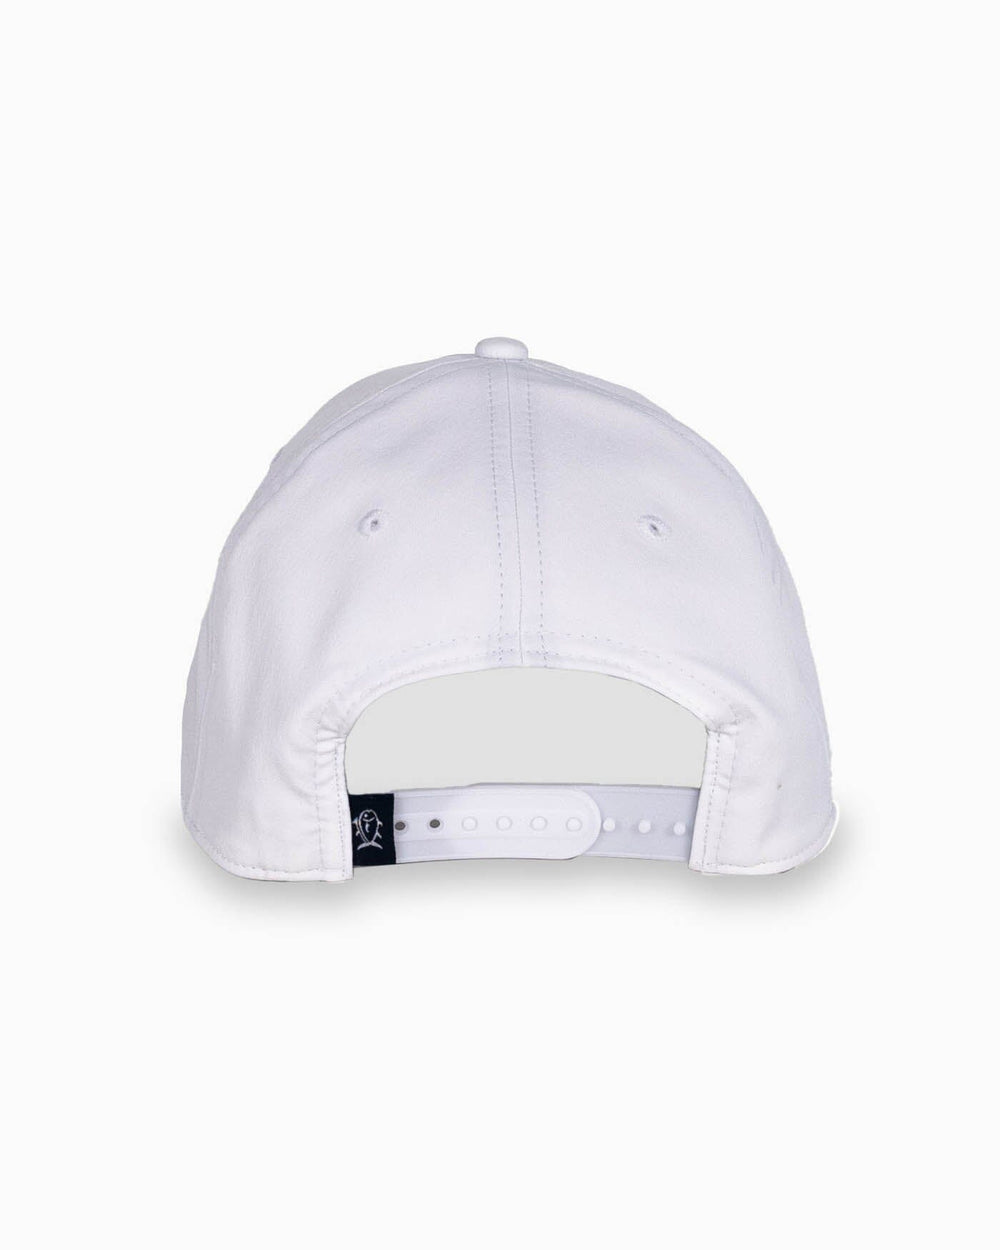 The back view of the Southern Tide Circle Skipjack Patch Performance Hat by Southern Tide - Classic White